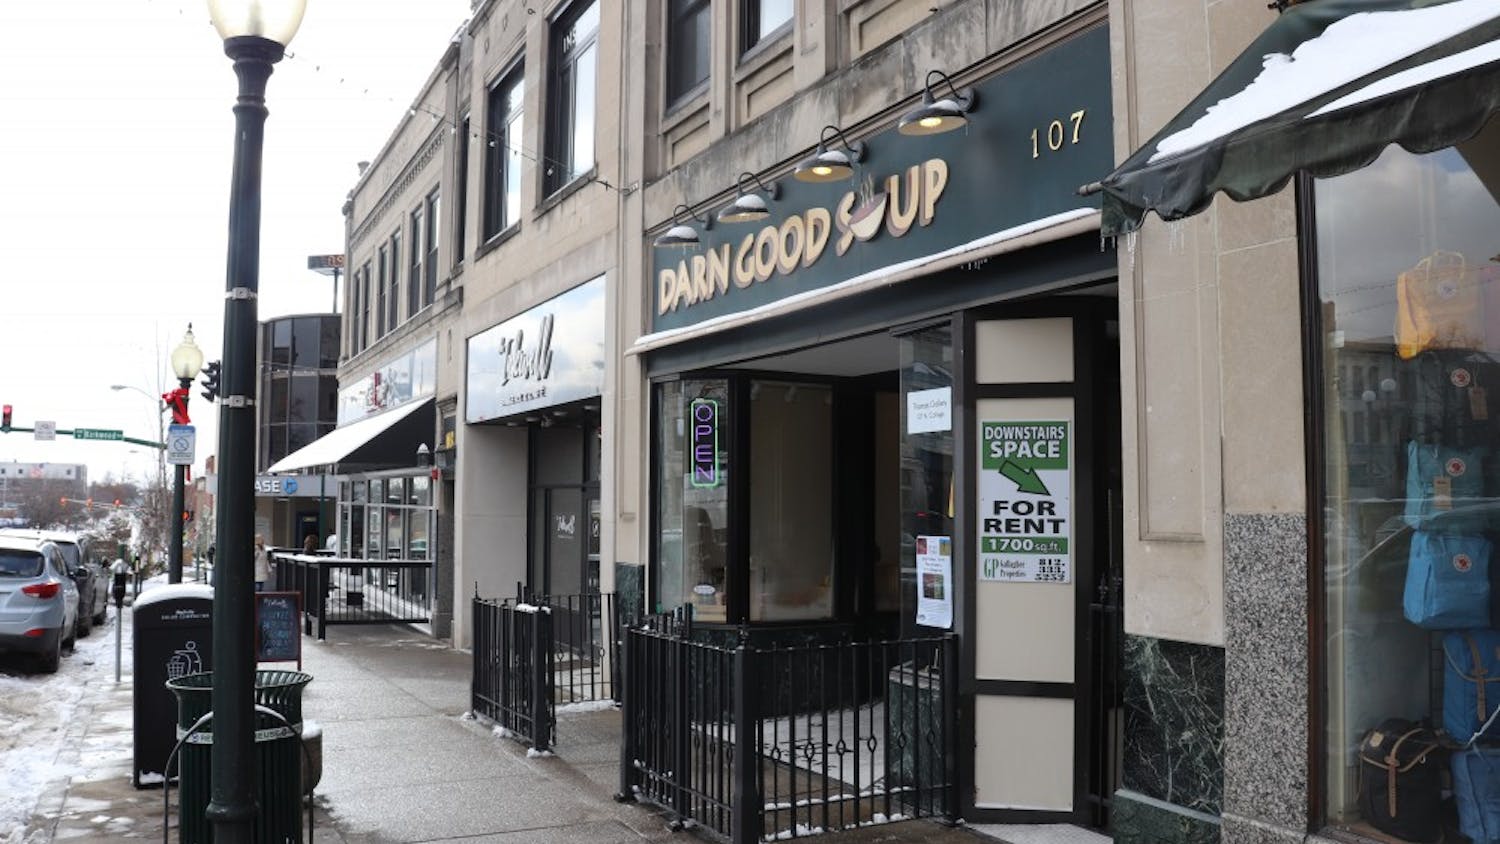 Darn Good Soup is an eatery where local soup-lovers can find many different styles of soup. The establishment is open from 11 a.m. to 7:30 p.m. every day.
